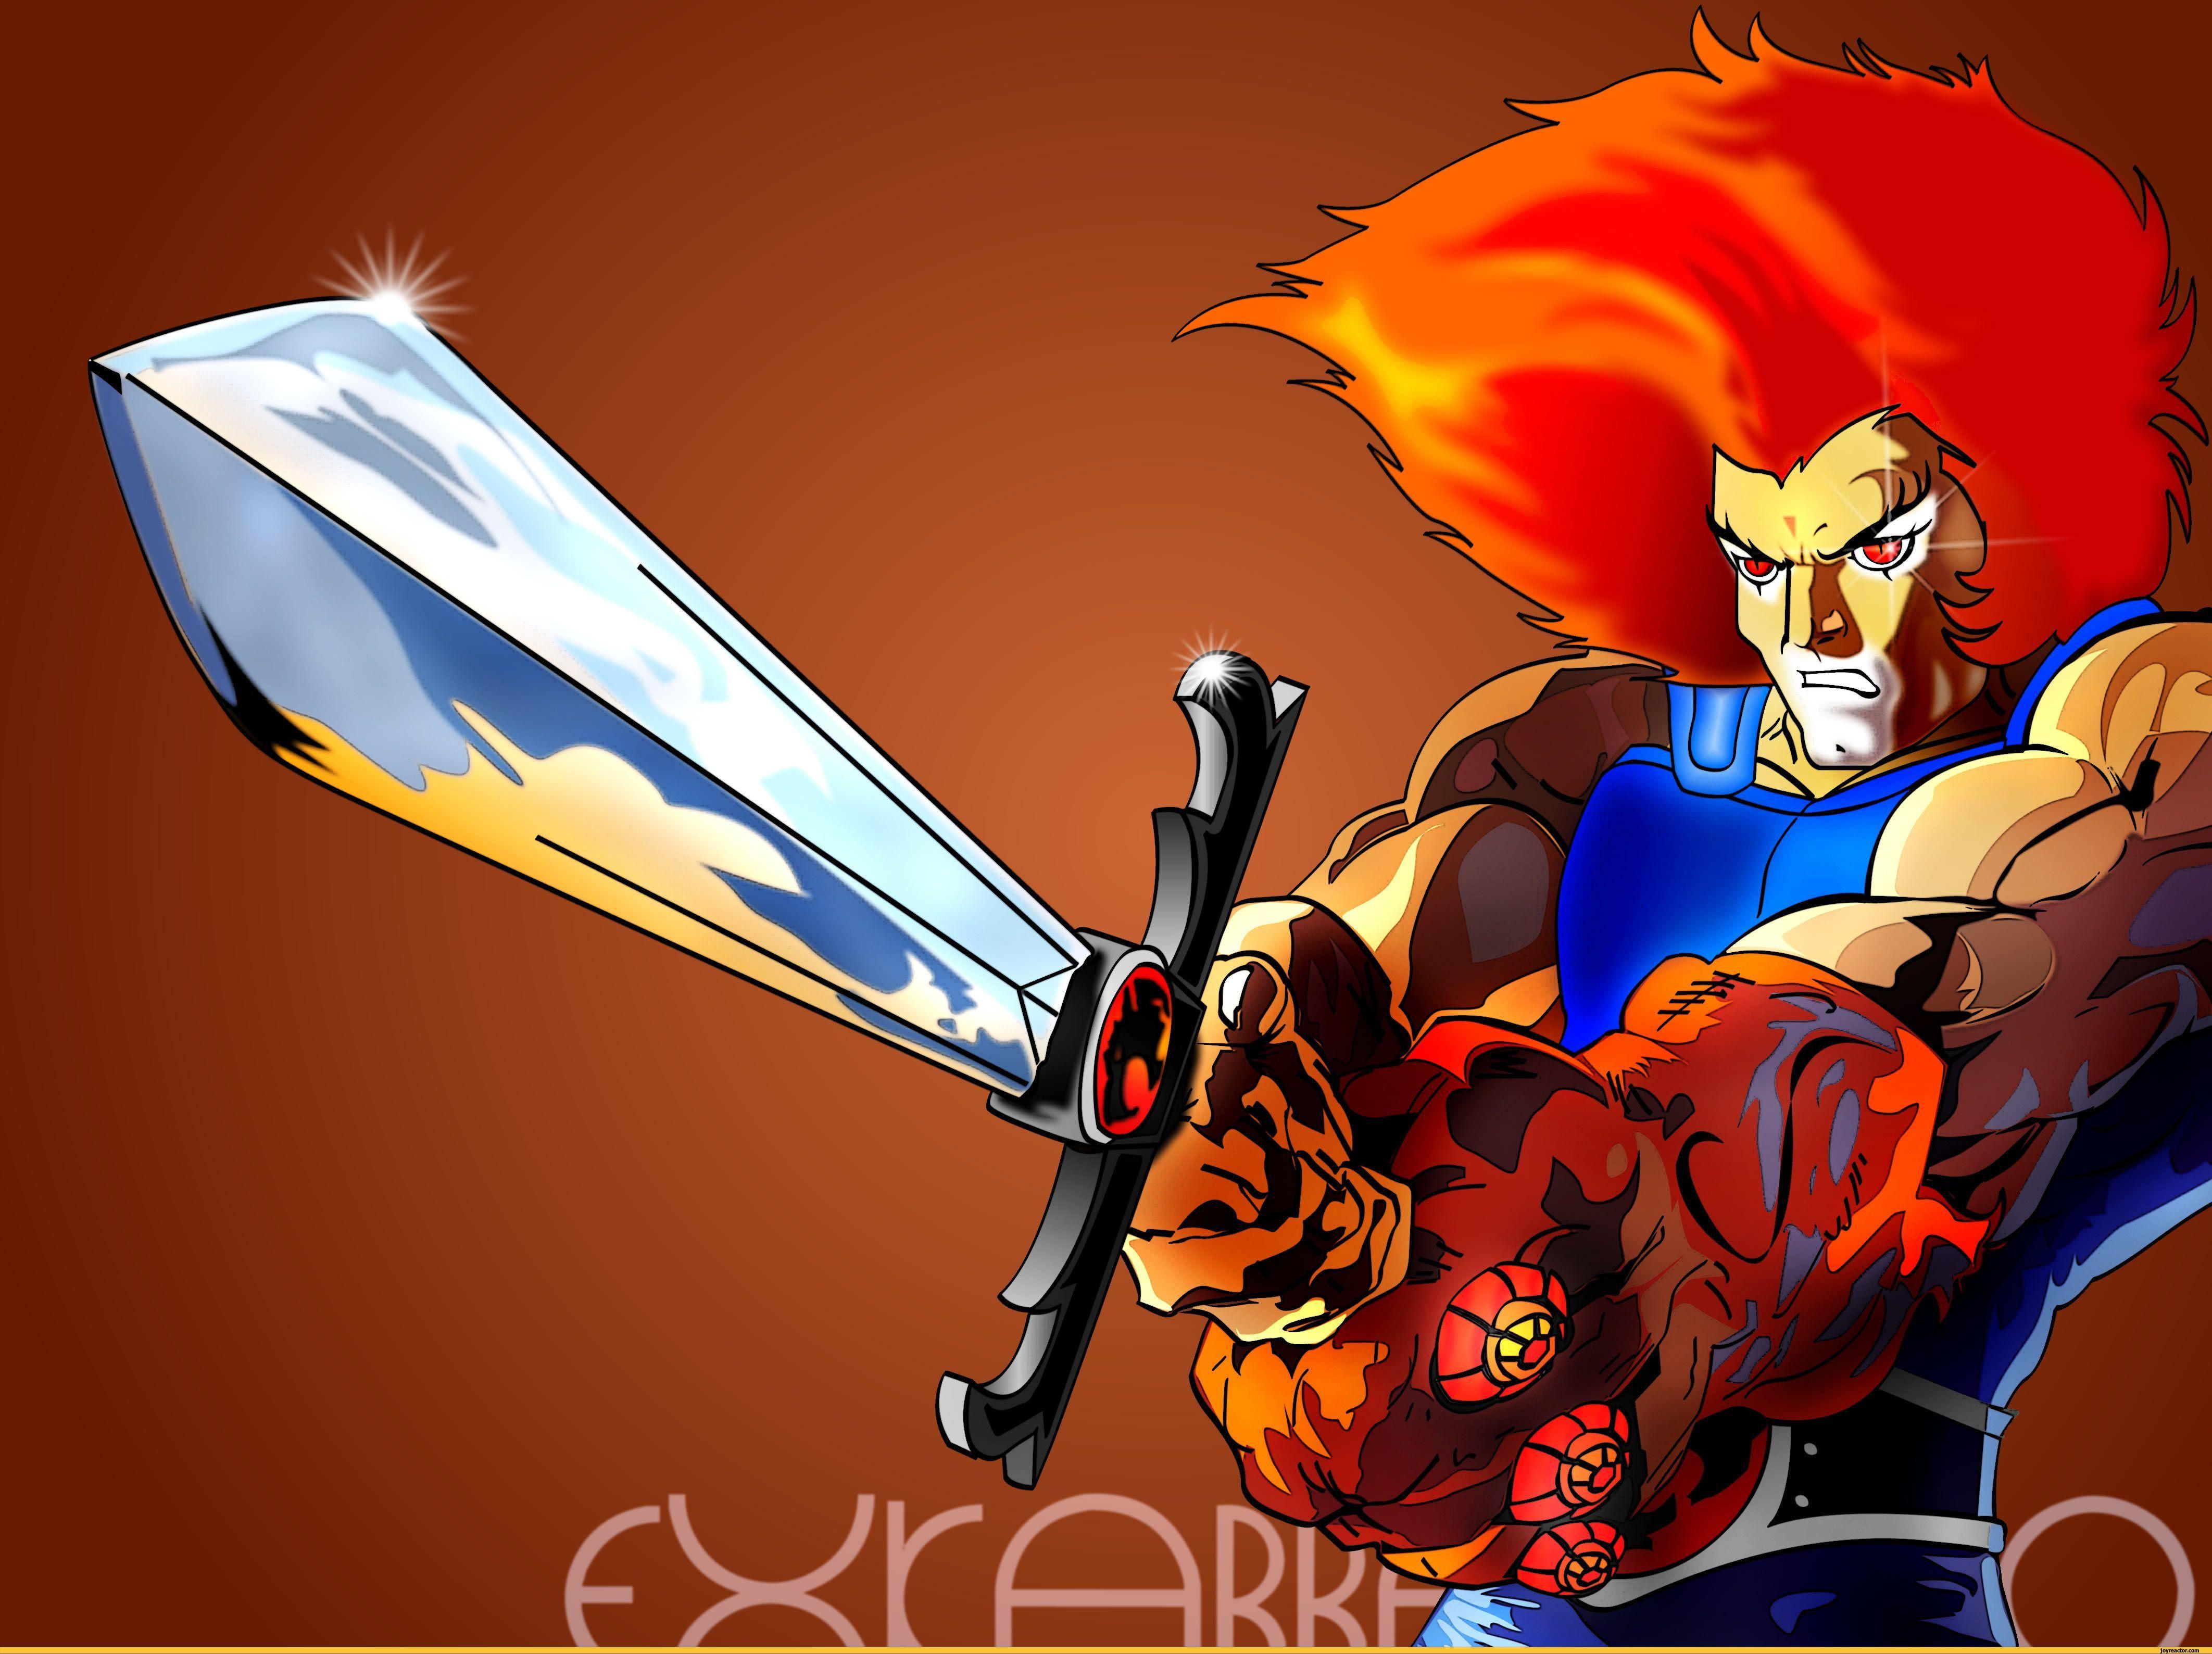 Thundercats HD Wallpaper For Android, iPhone